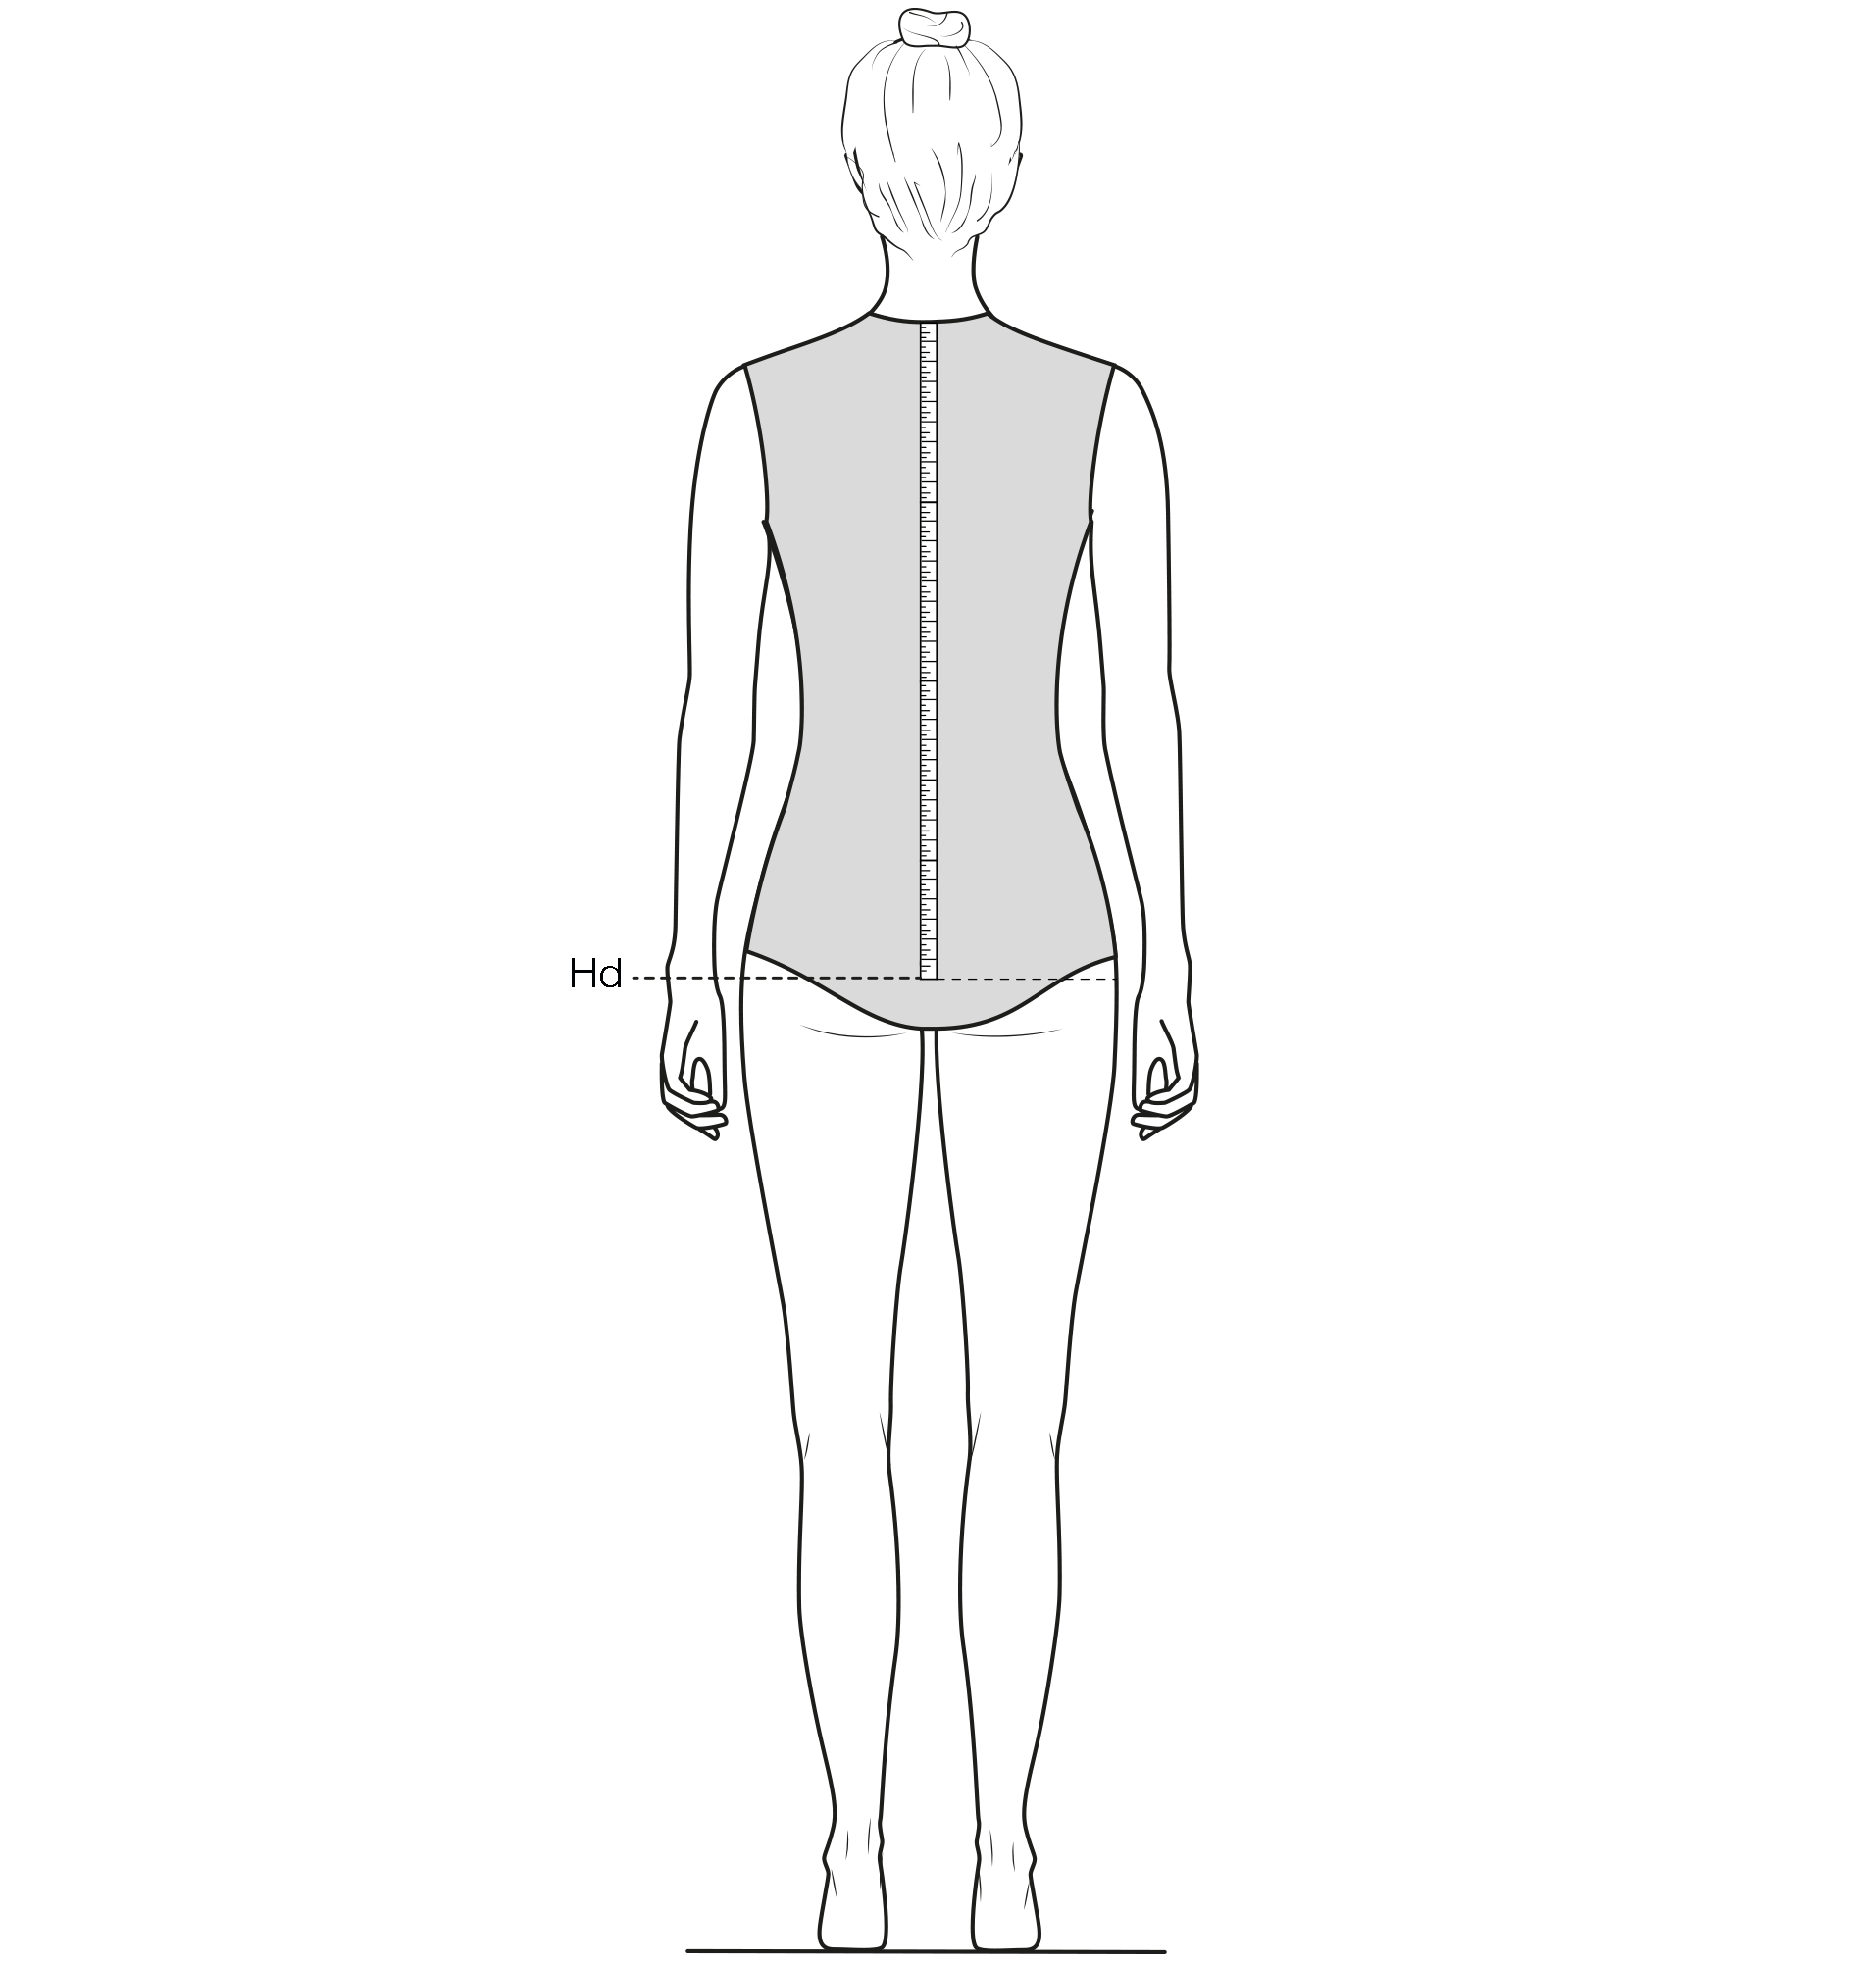 This figure shows the measurement of the Hip depth